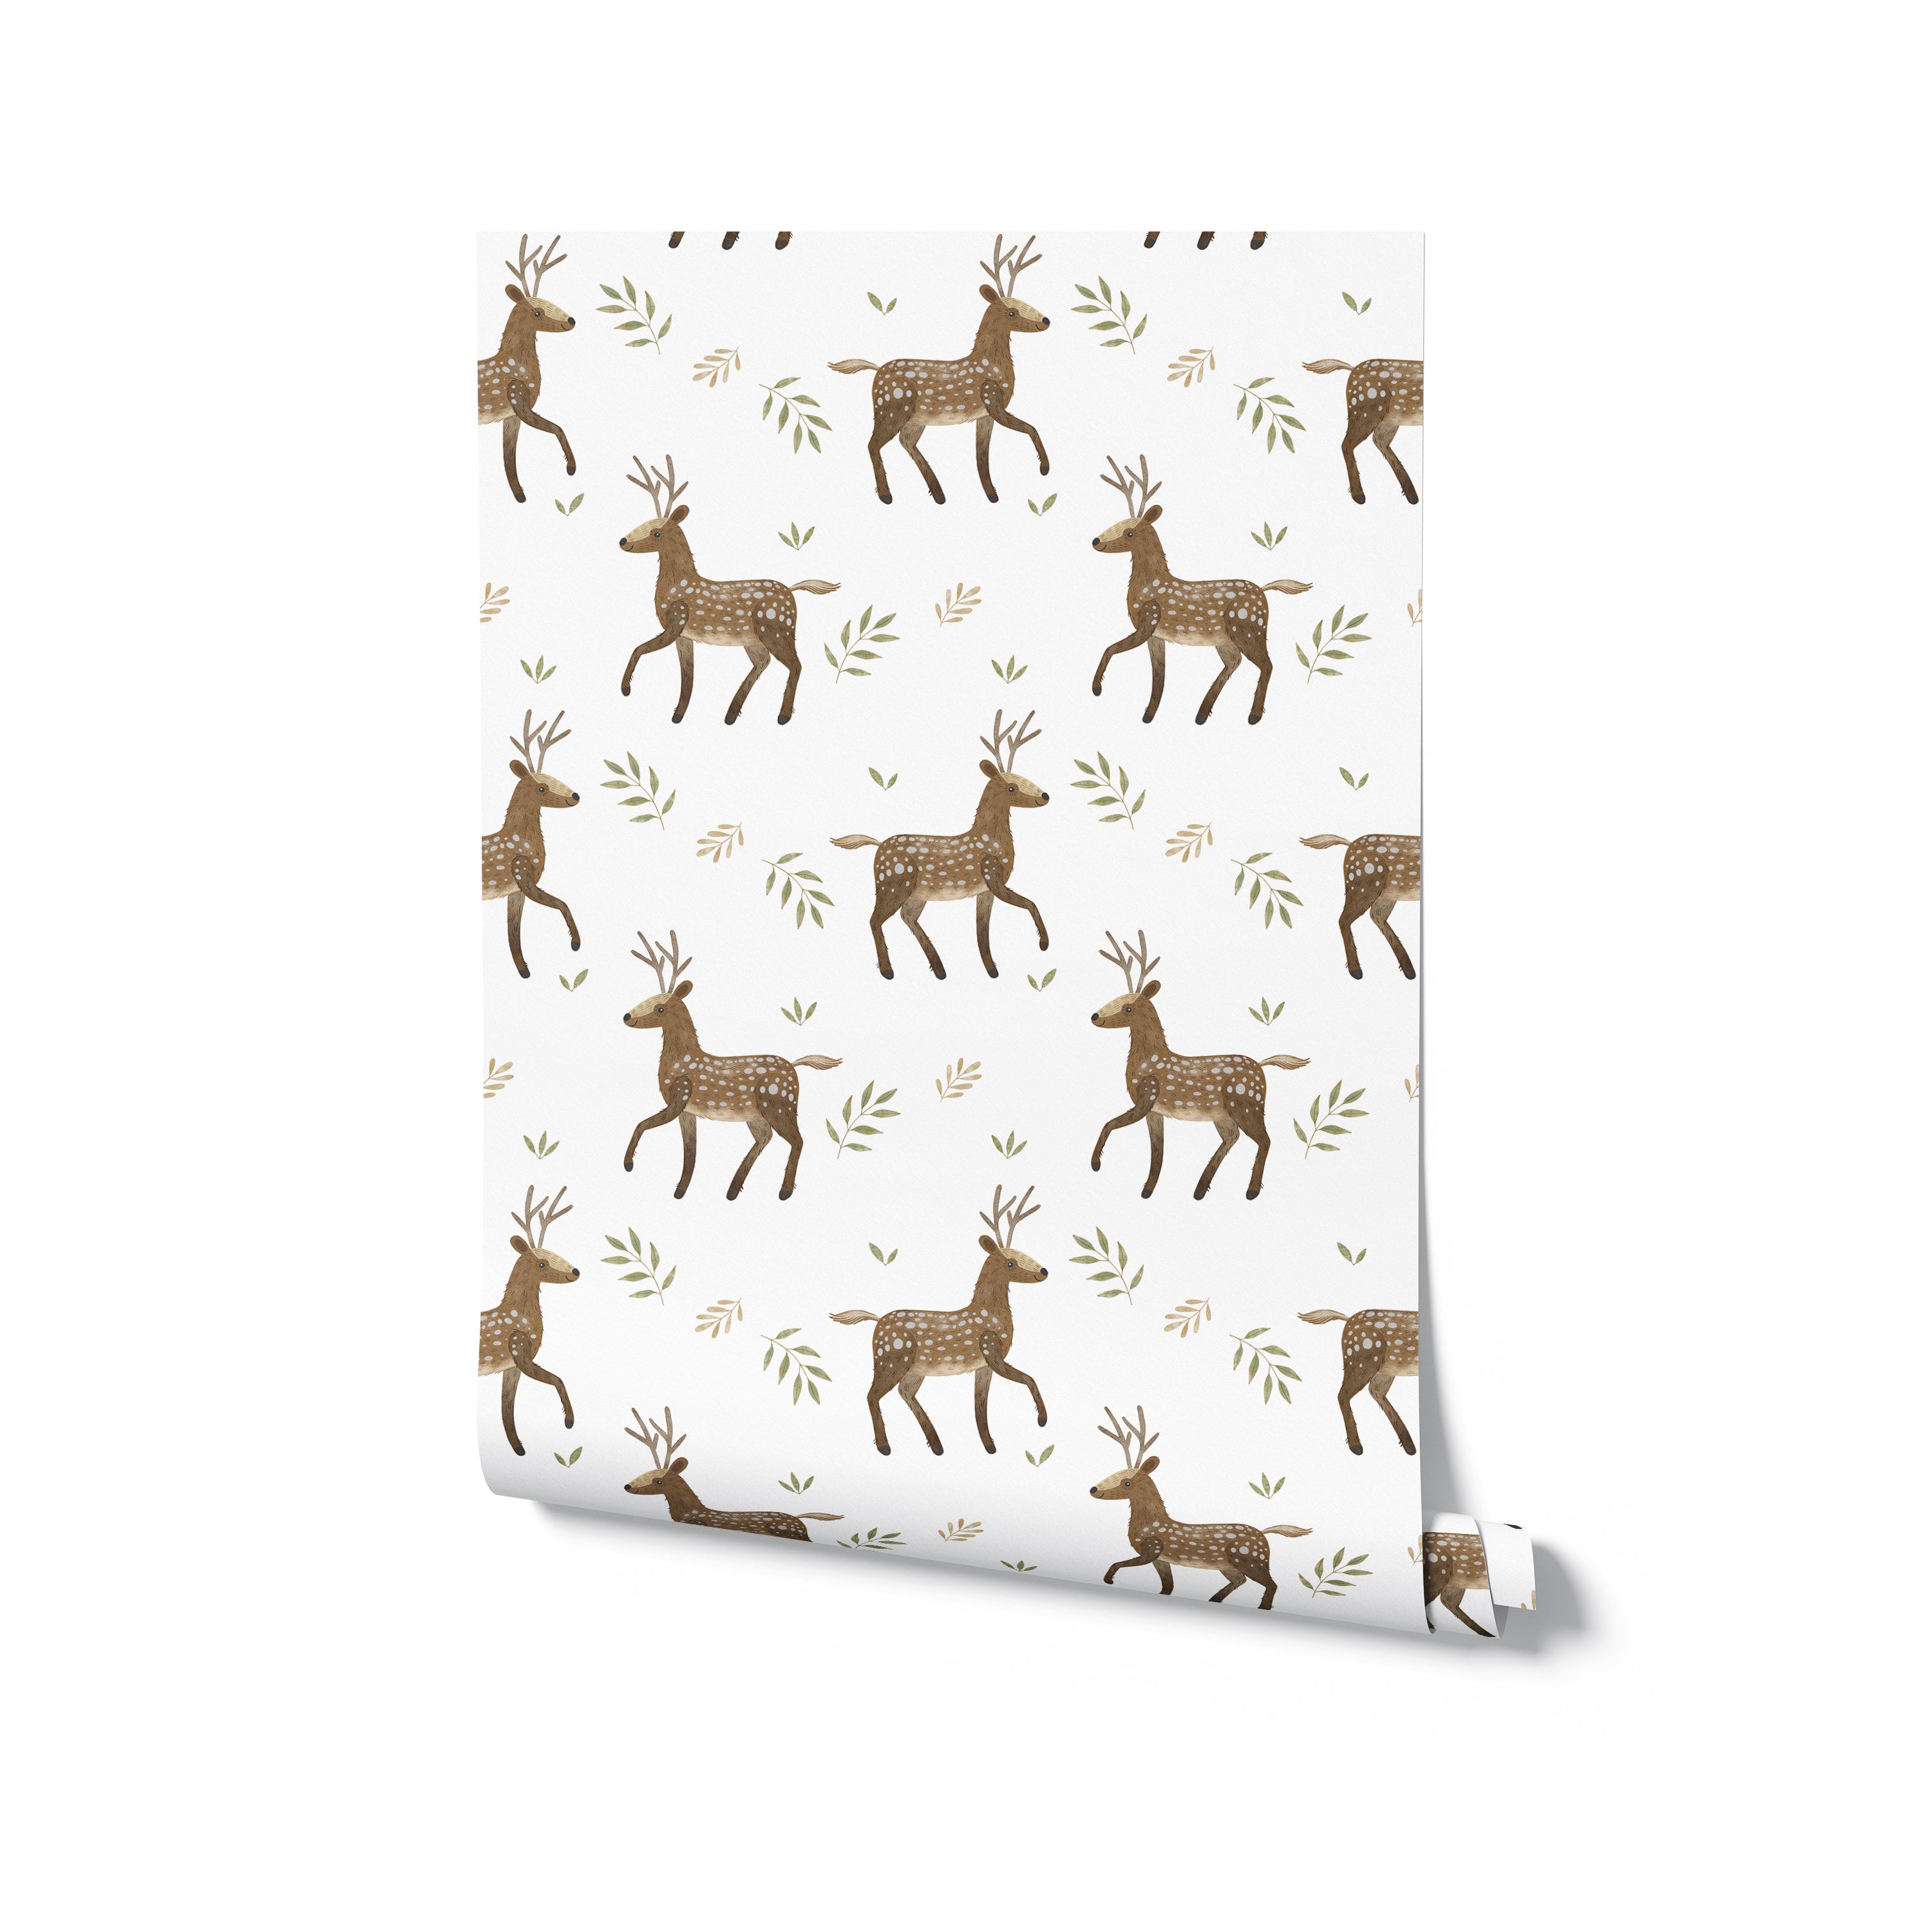 Rolled view of Forest Stag Wallpaper highlighting detailed illustrations of stags amidst green foliage on a clean white background. This design adds a touch of wildlife charm to interiors, perfect for spaces designed for children or nature enthusiasts